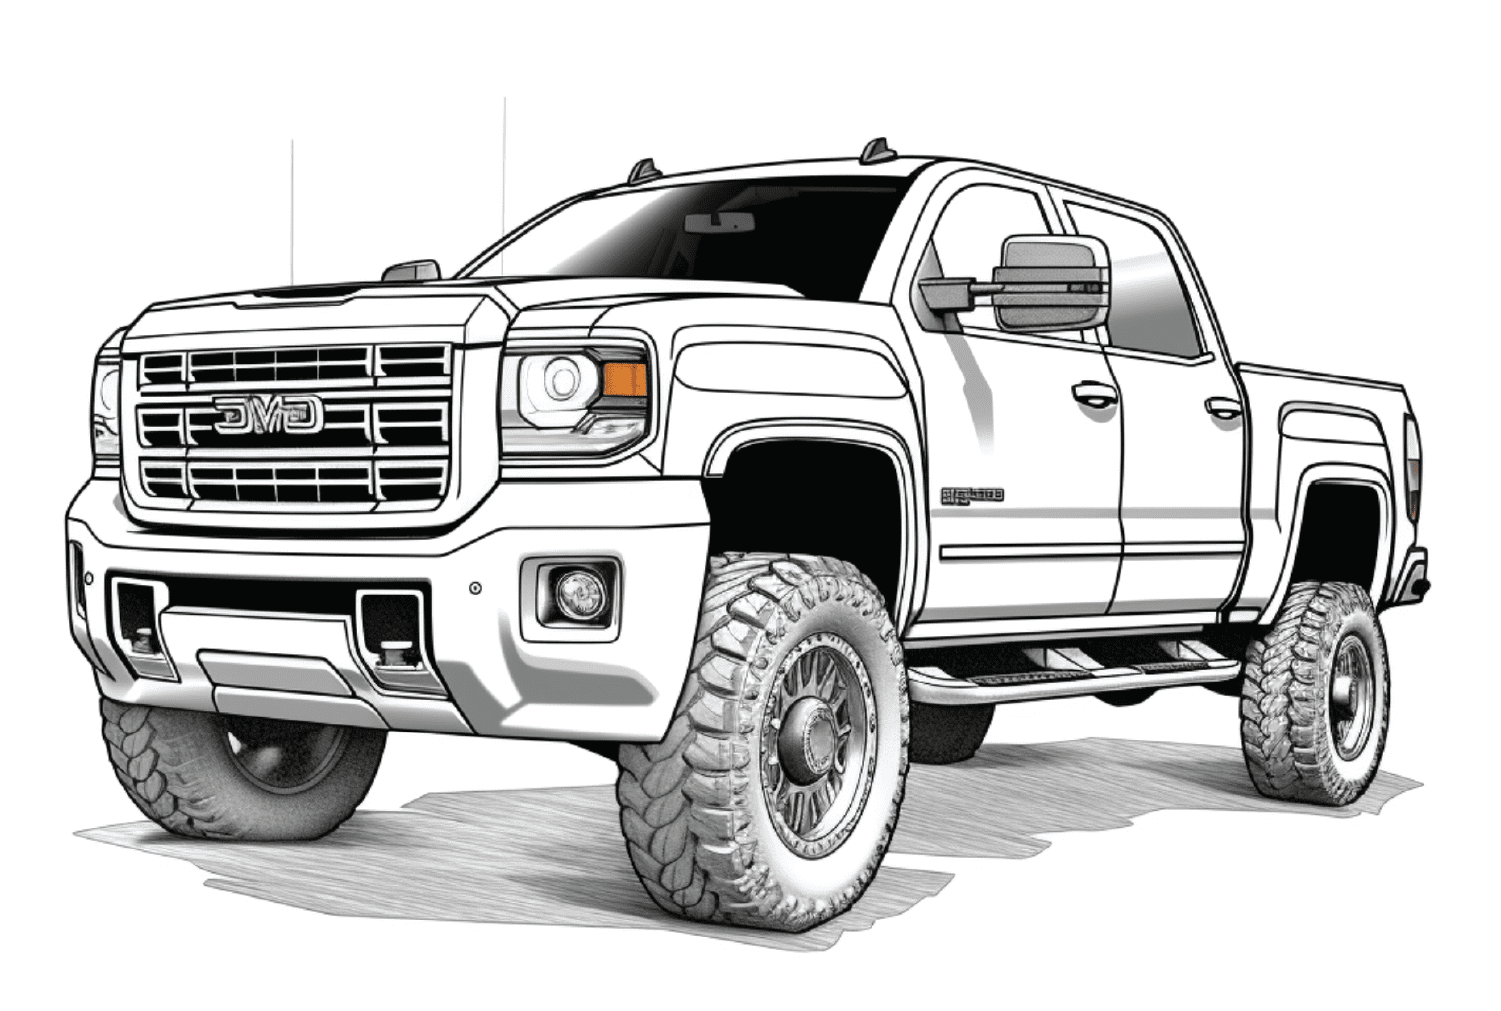 GMC Sierra HD Trucks Coloring Page - Free Printable Coloring Pages